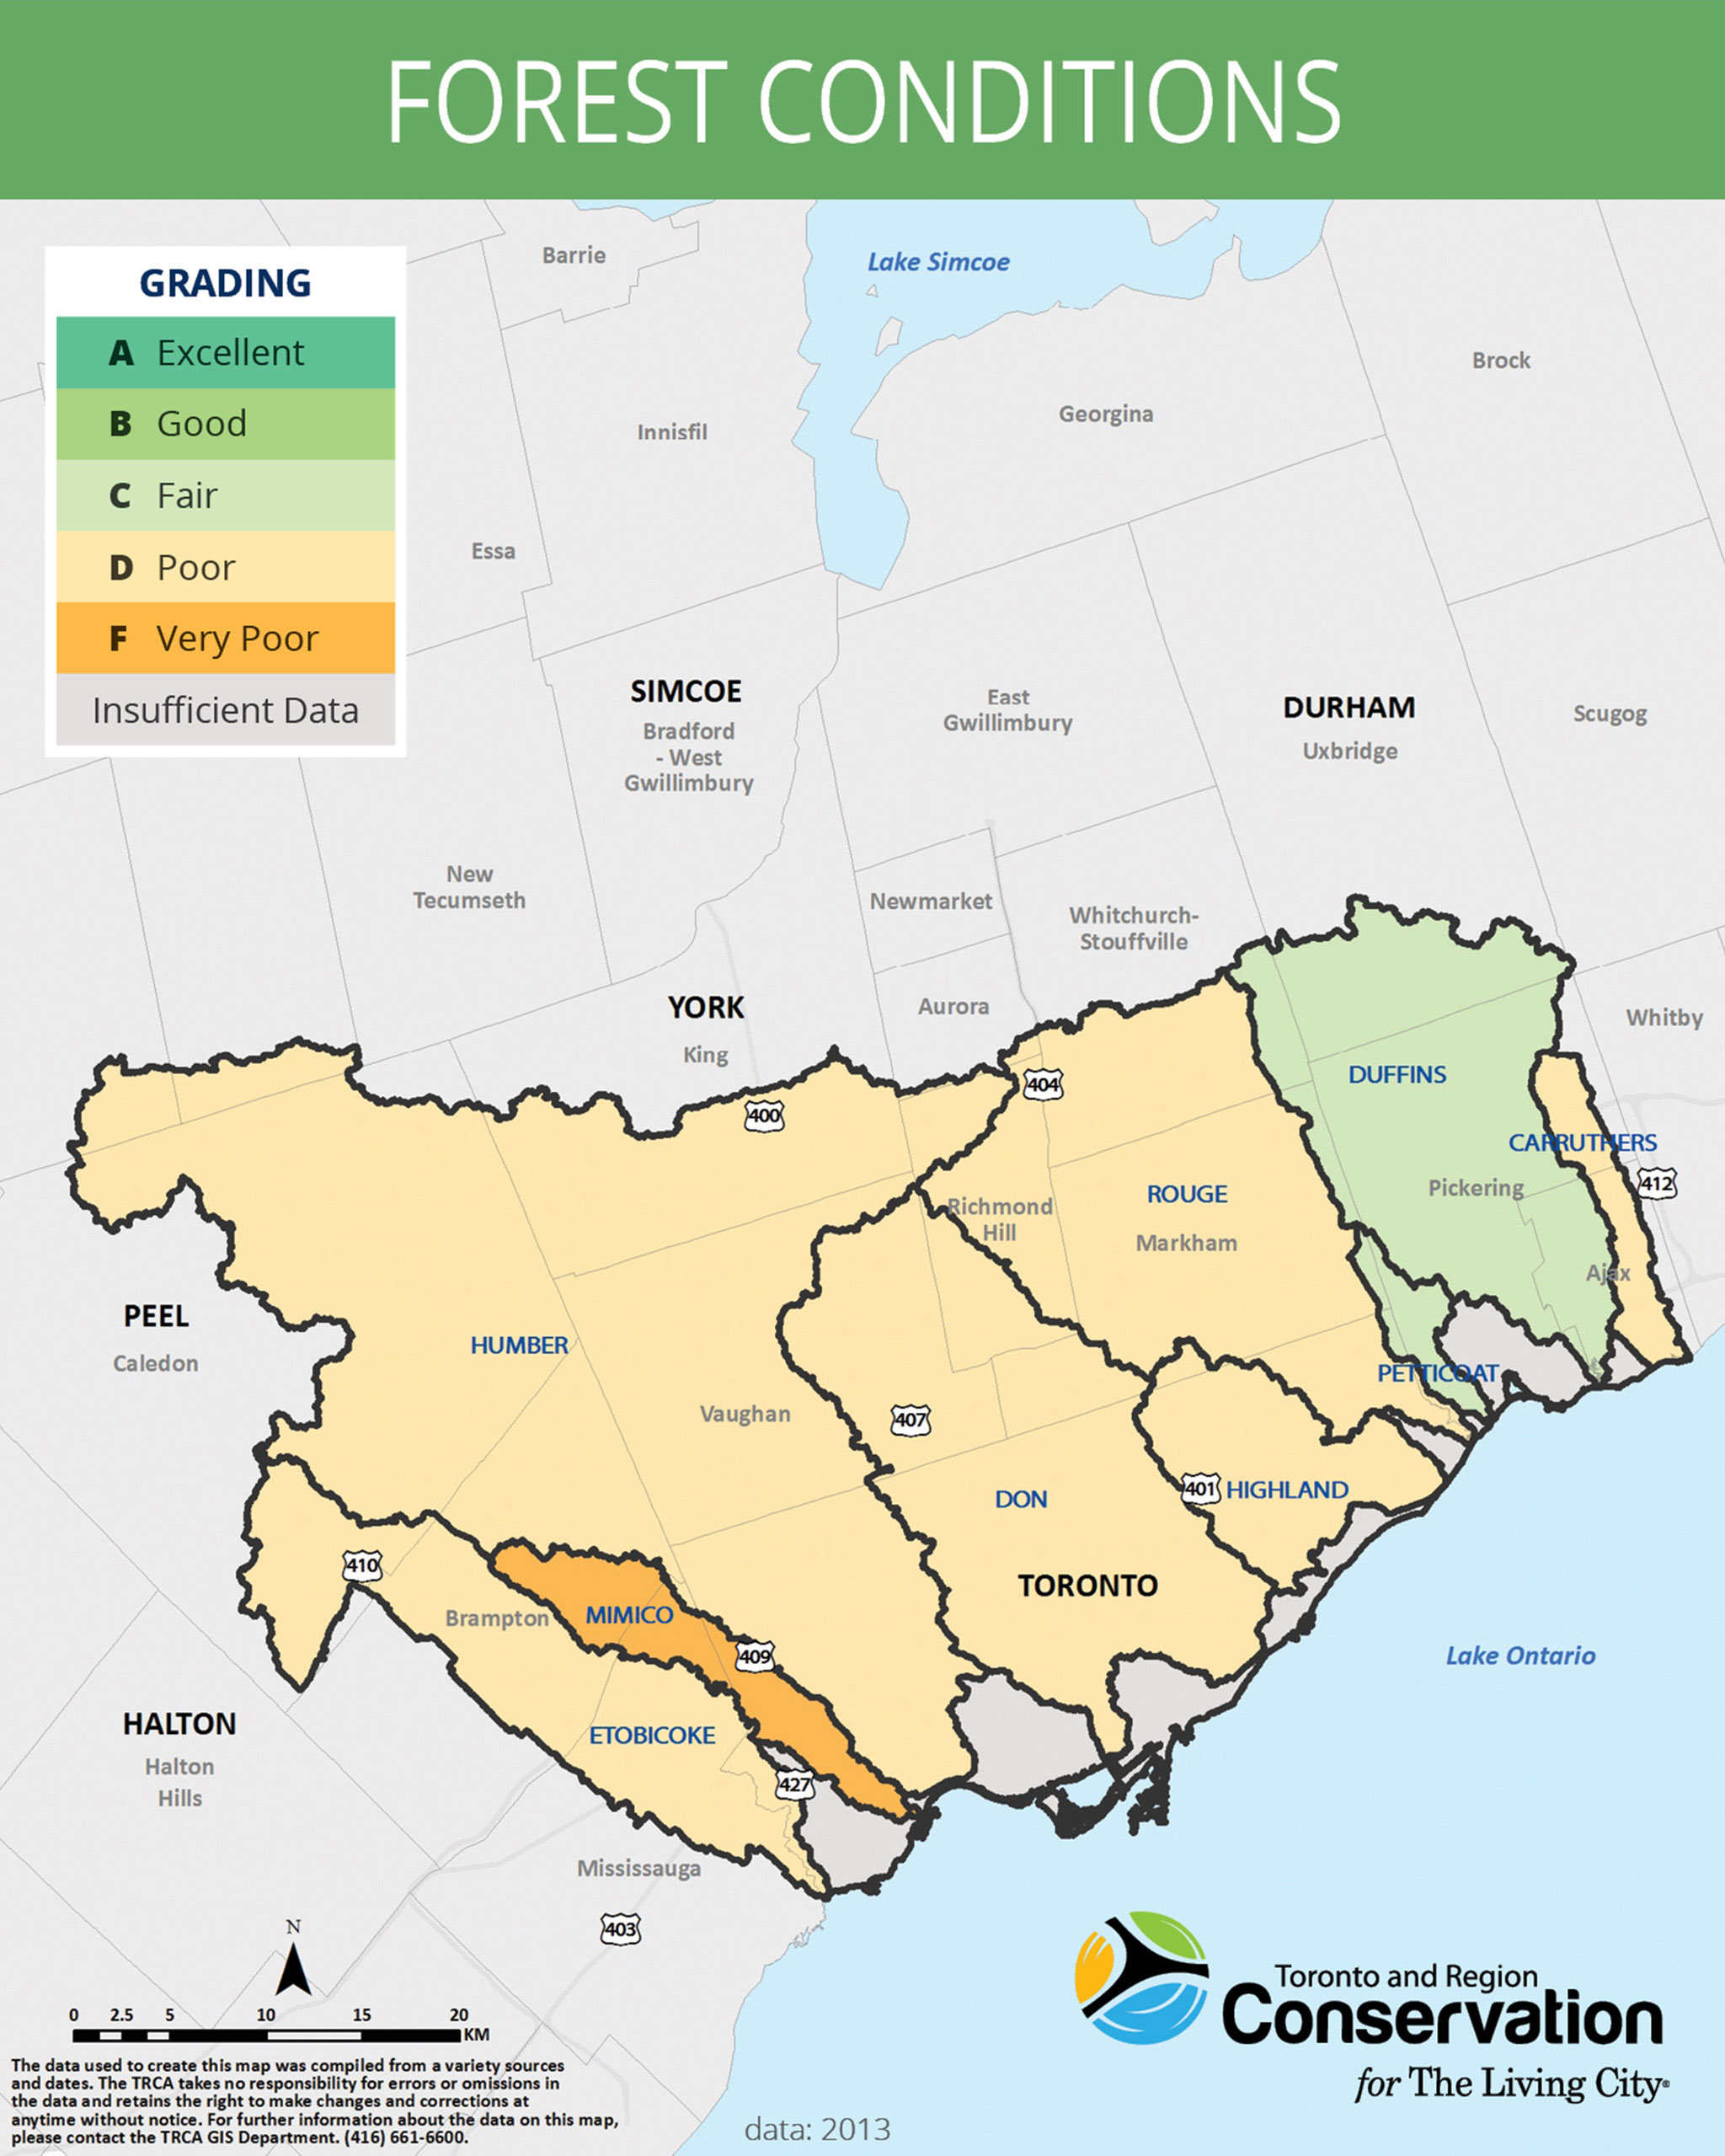 map of forest conditions in TRCA jurisdiction